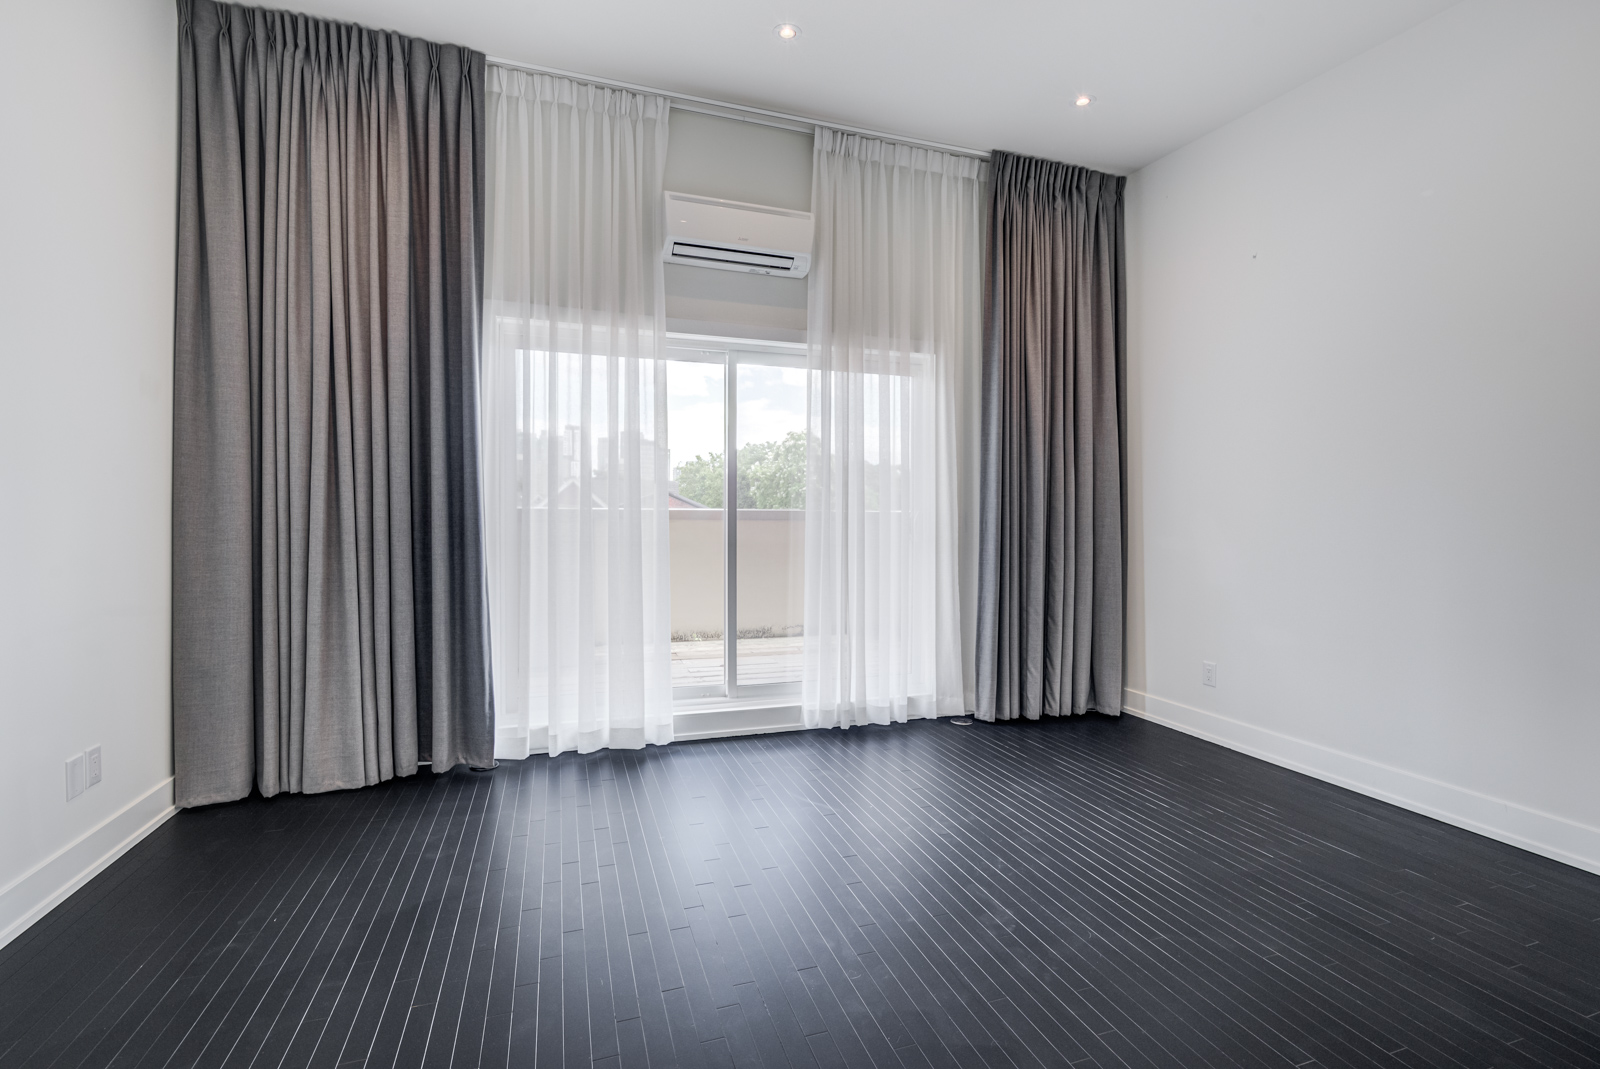 Empty master bedroom with black floors and white and gray curtains